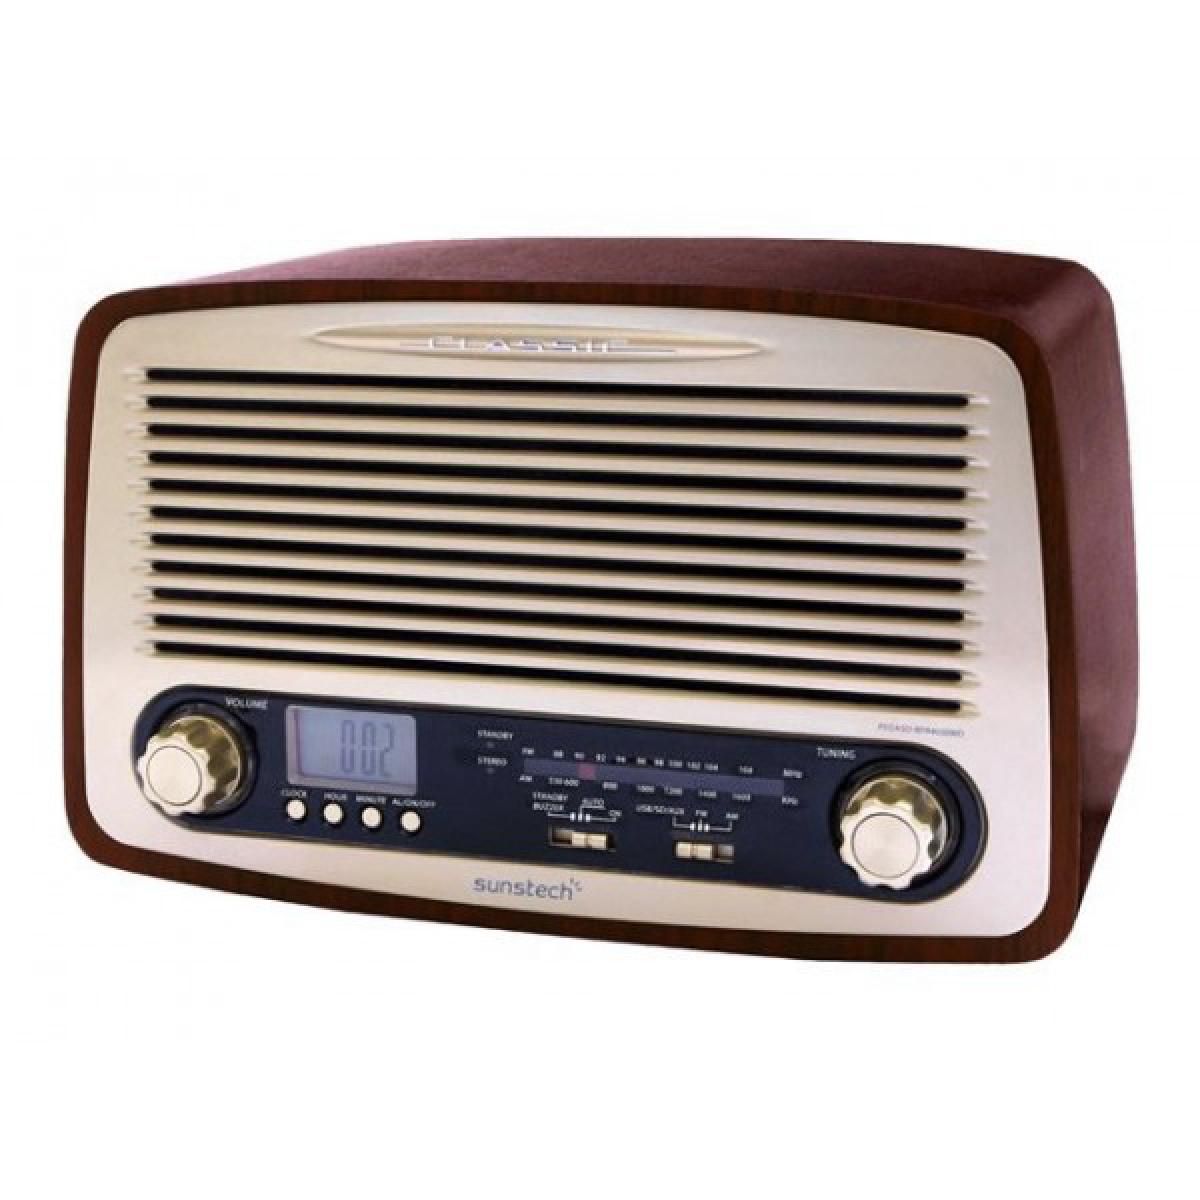 Sunstech - Radio multi - function wood and retro - Drone connecté